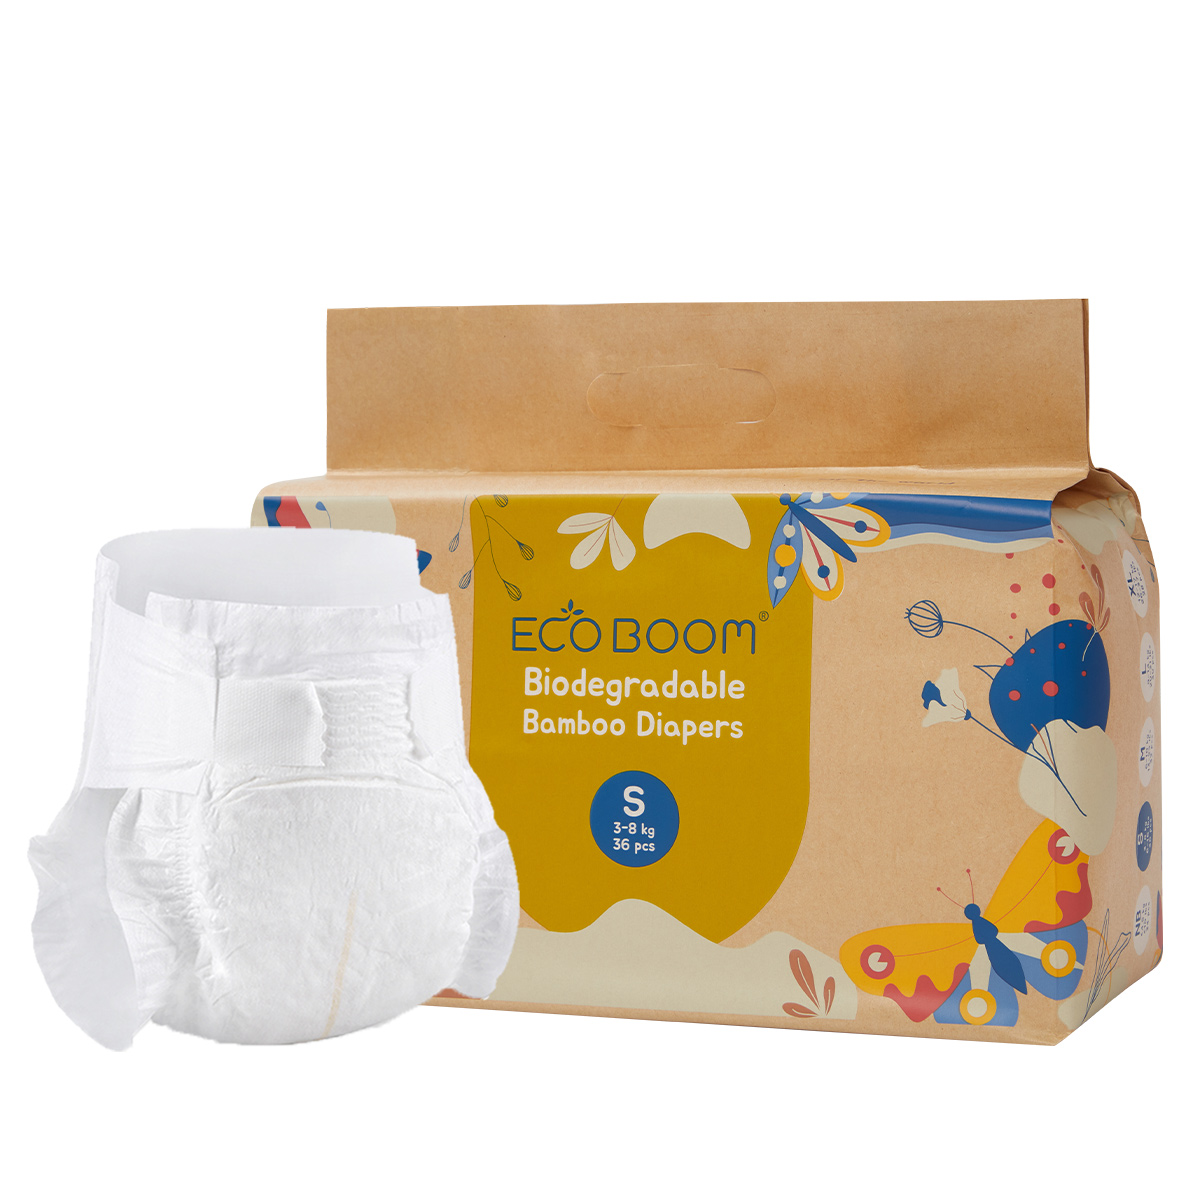 ECO BOOM organic disposable diapers company-1